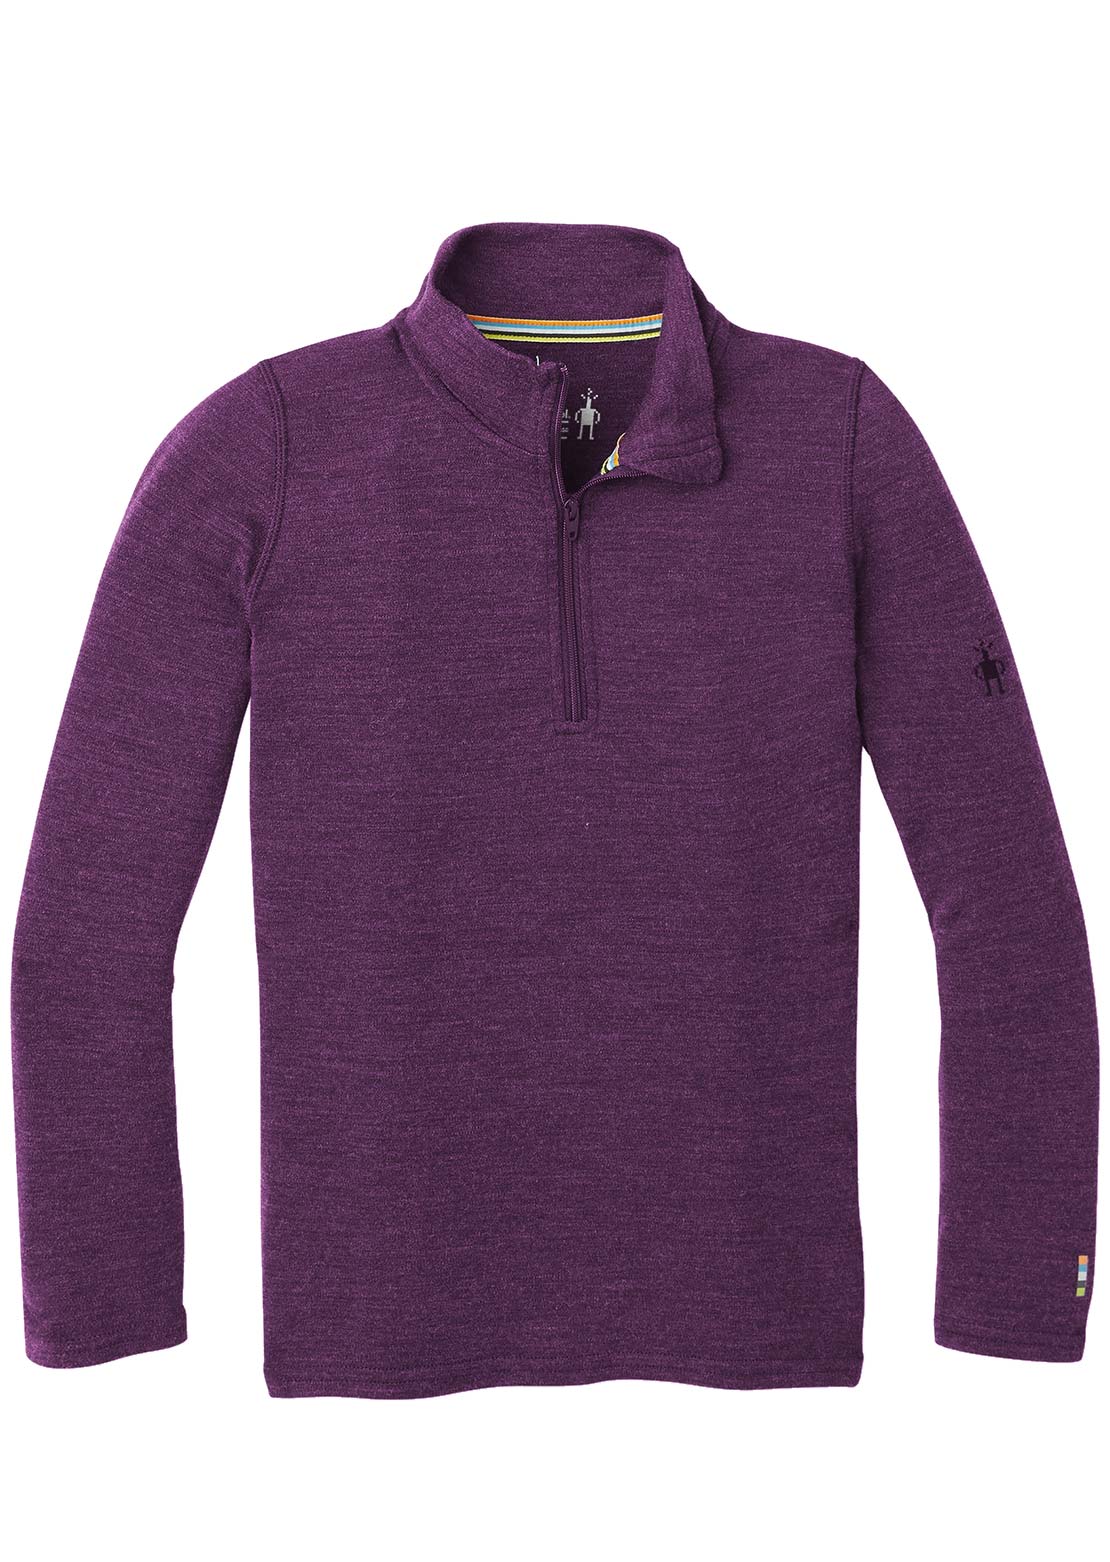 https://cdn.shopify.com/s/files/1/0155/0629/products/smartwool-junior-classic-thermal-merino-base-layer-1-4-zip-boxed-top-purple-iris-heather-flat-front.jpg?v=1674414642